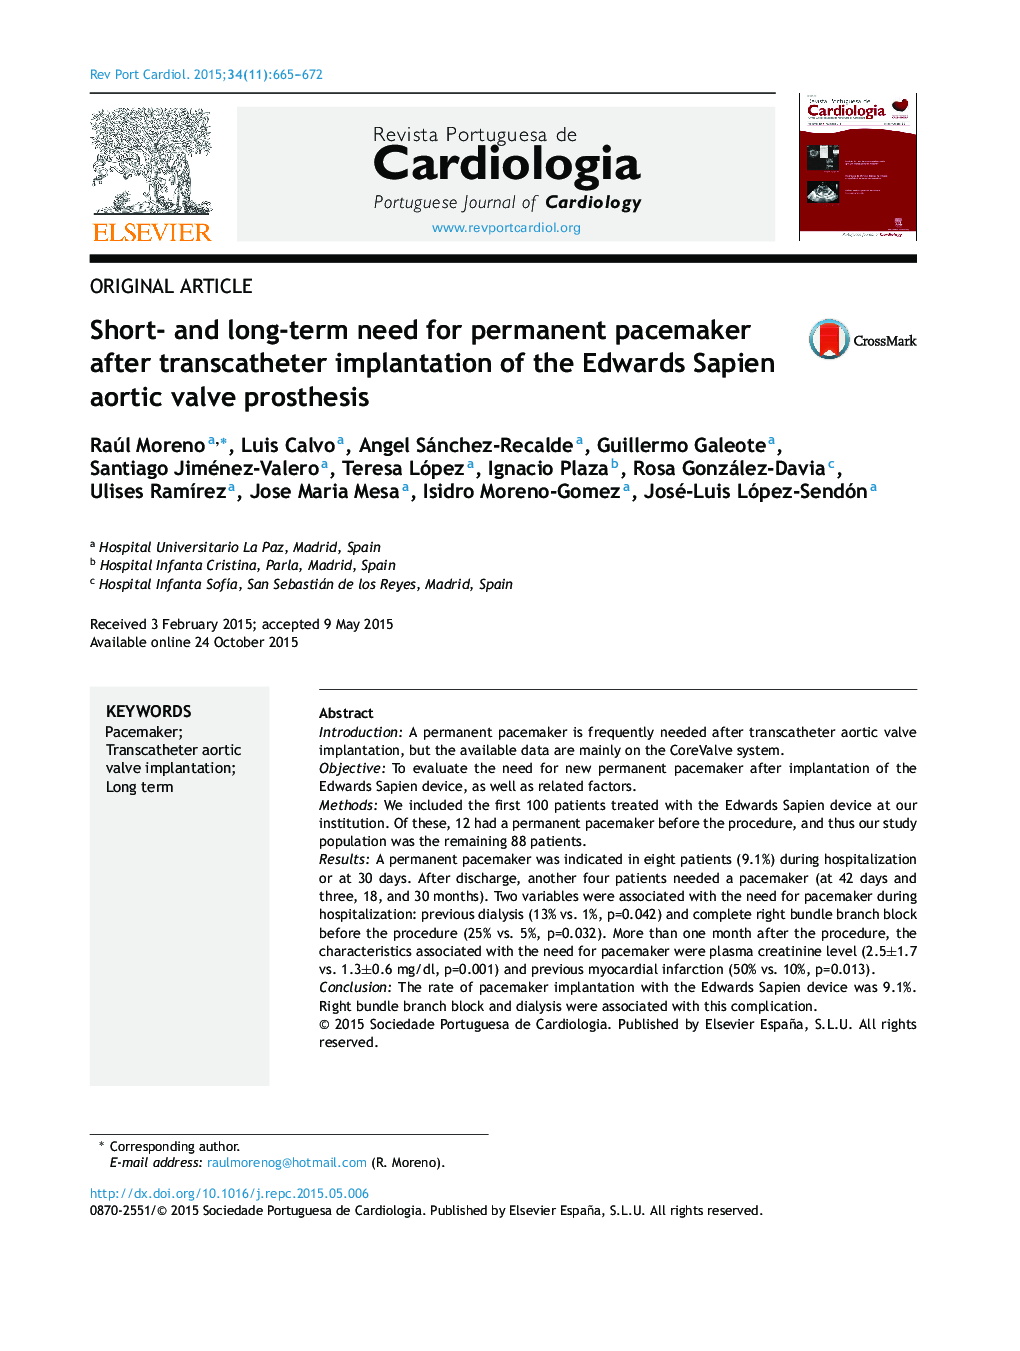 Short- and long-term need for permanent pacemaker after transcatheter implantation of the Edwards Sapien aortic valve prosthesis